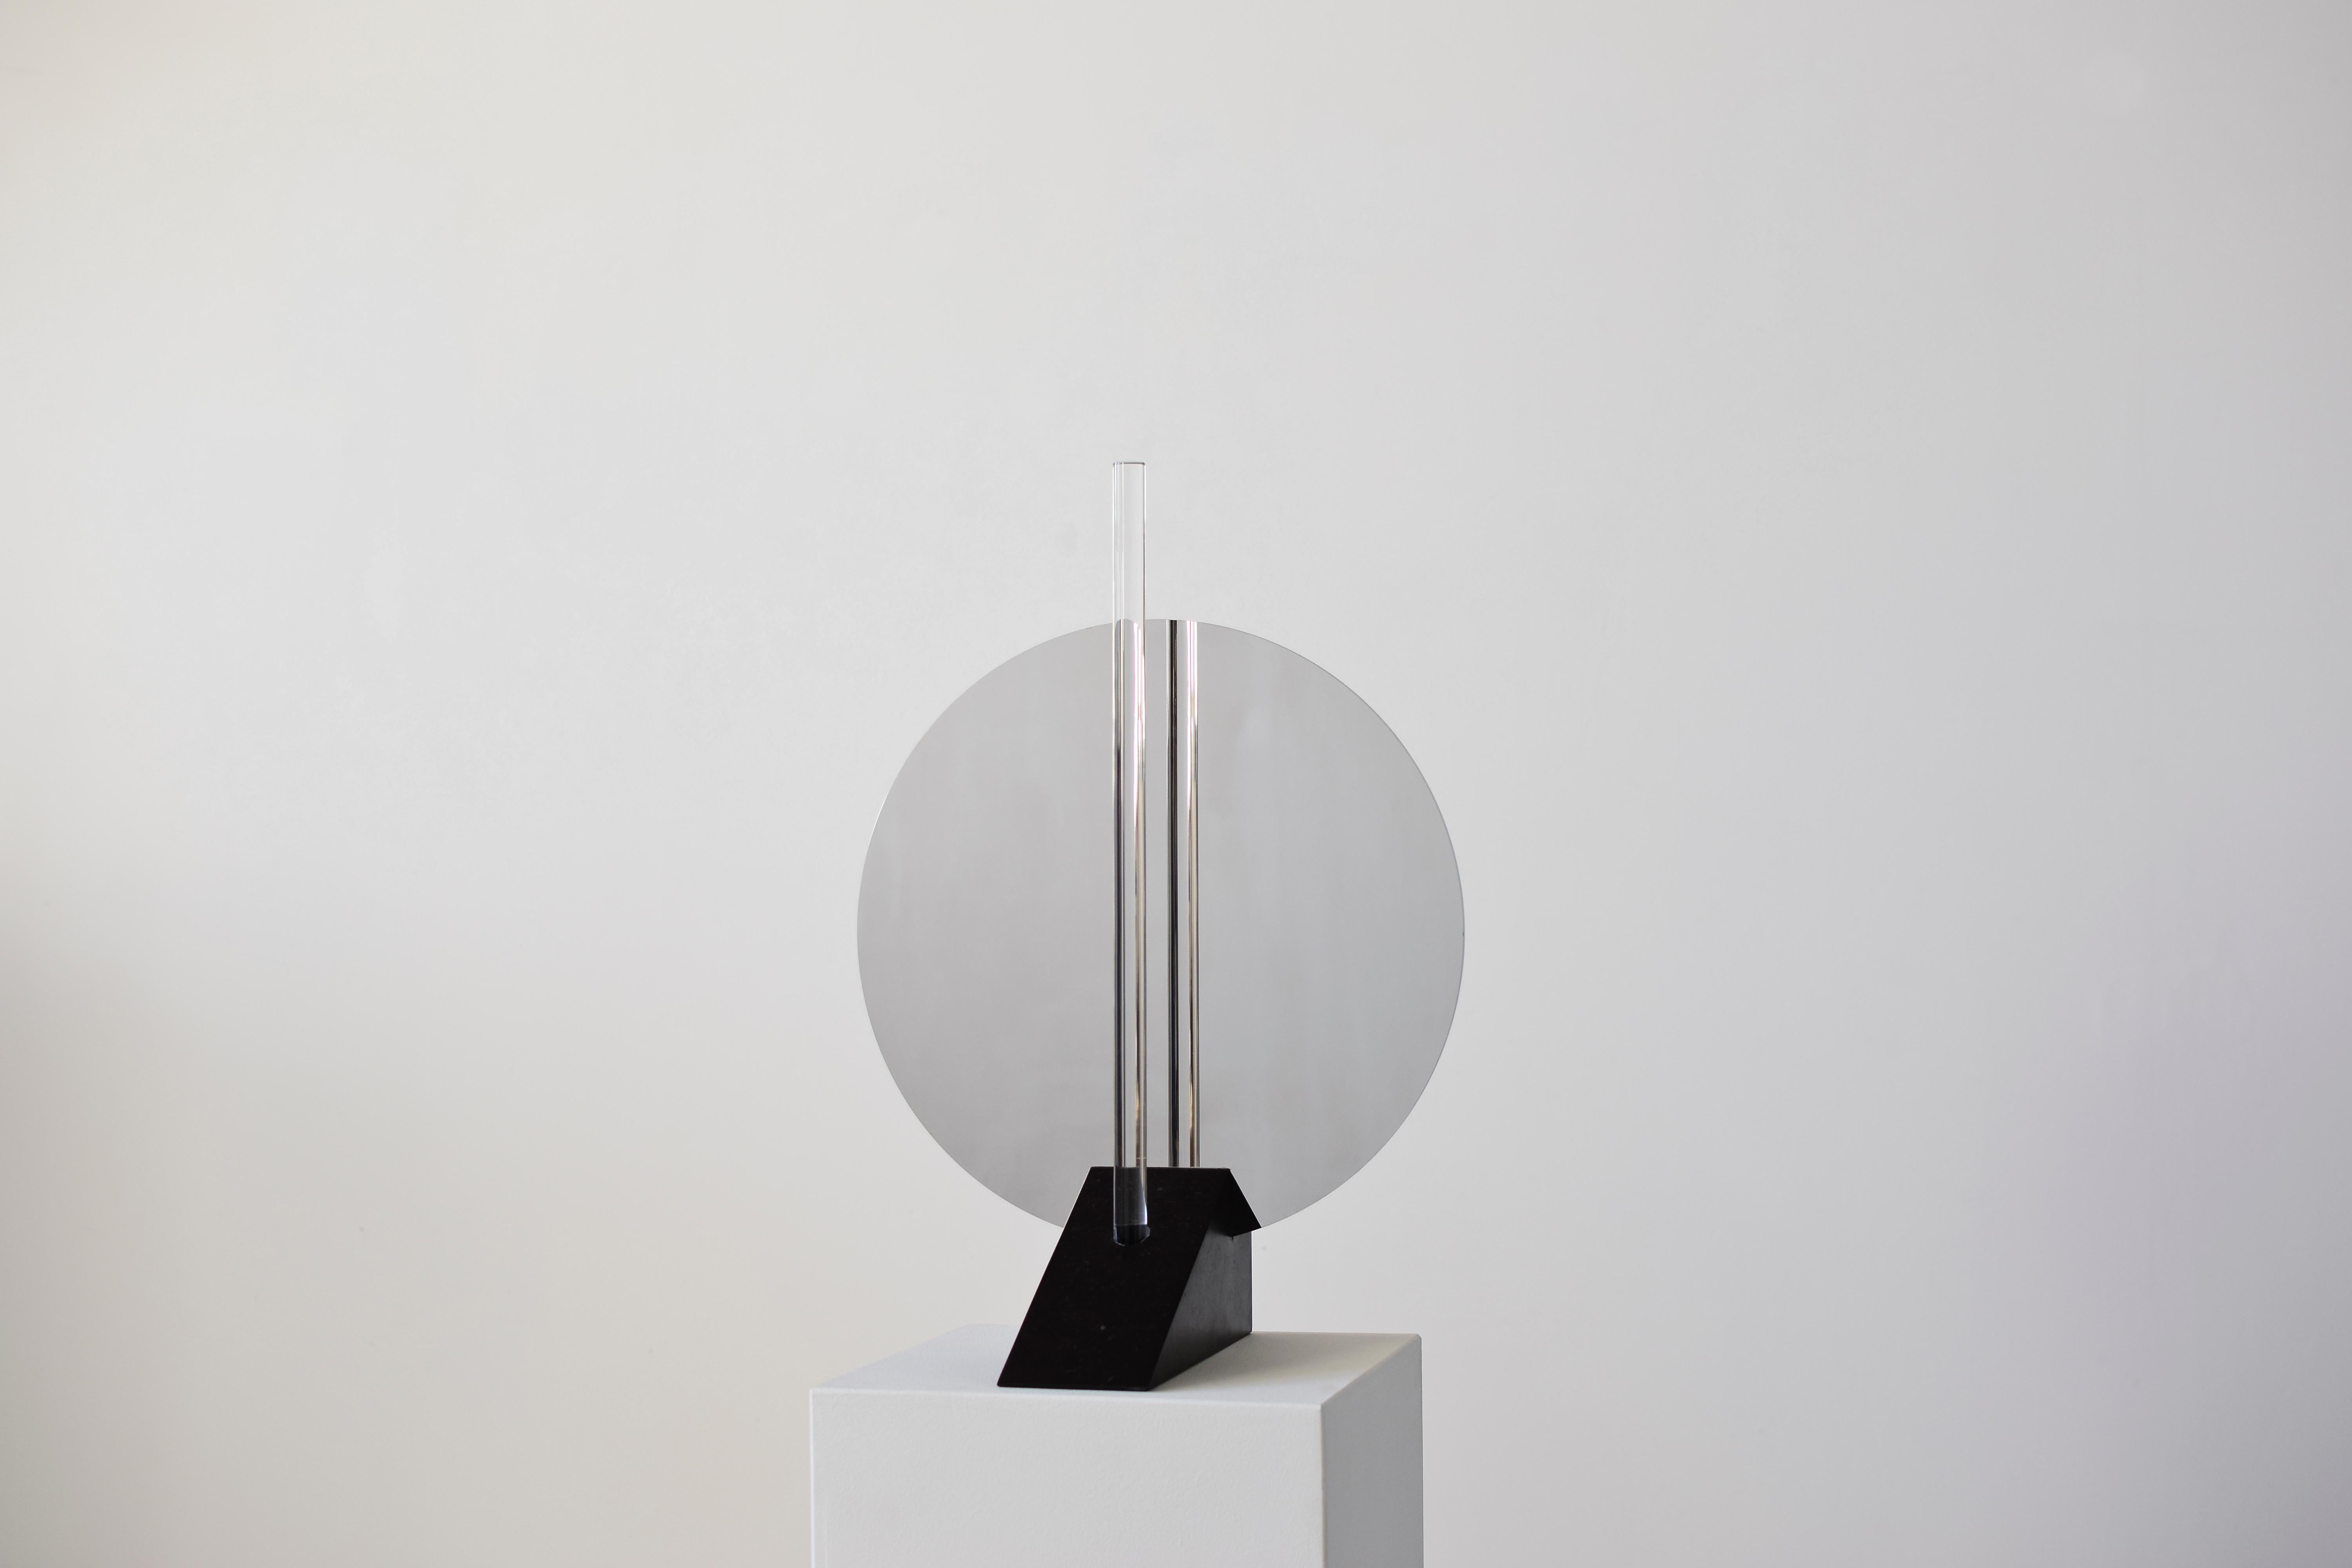 Sculptural table lamp - Maximilian Michaelis

Title: The elusive nature of perception, No. 02

Measures: ca. 39 x 55 x 27 cm

Material: polished stainless steel, Belgian bluestone, acrylic glass, Led

The basis and inspiration for Maximilian